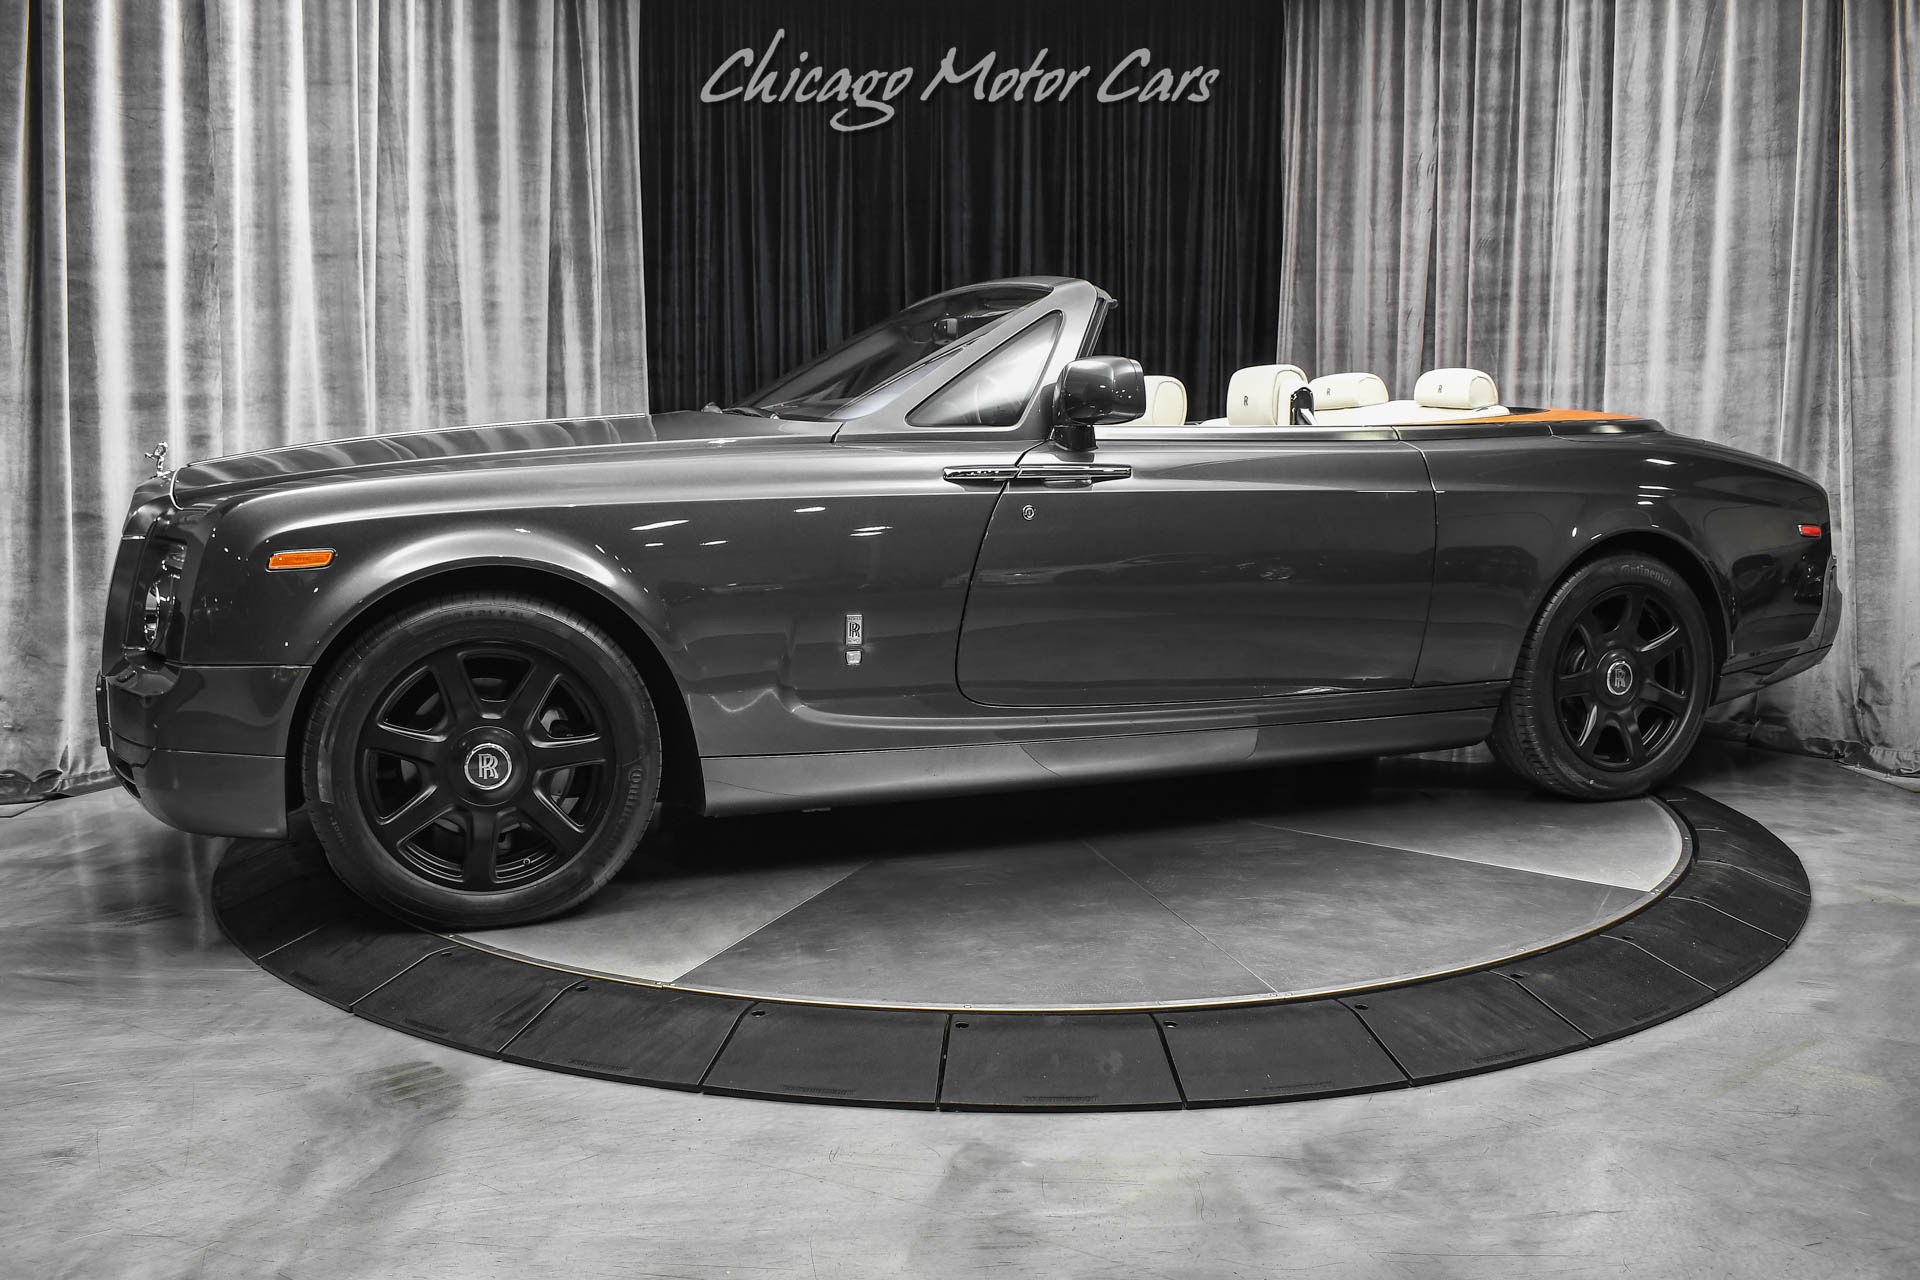 Used 2012 Rolls-Royce Phantom Drophead Convertible RARE! FULL PPF! Gorgeous Spec! Serviced For Sale ($229,800) | Motor Cars Stock #19721